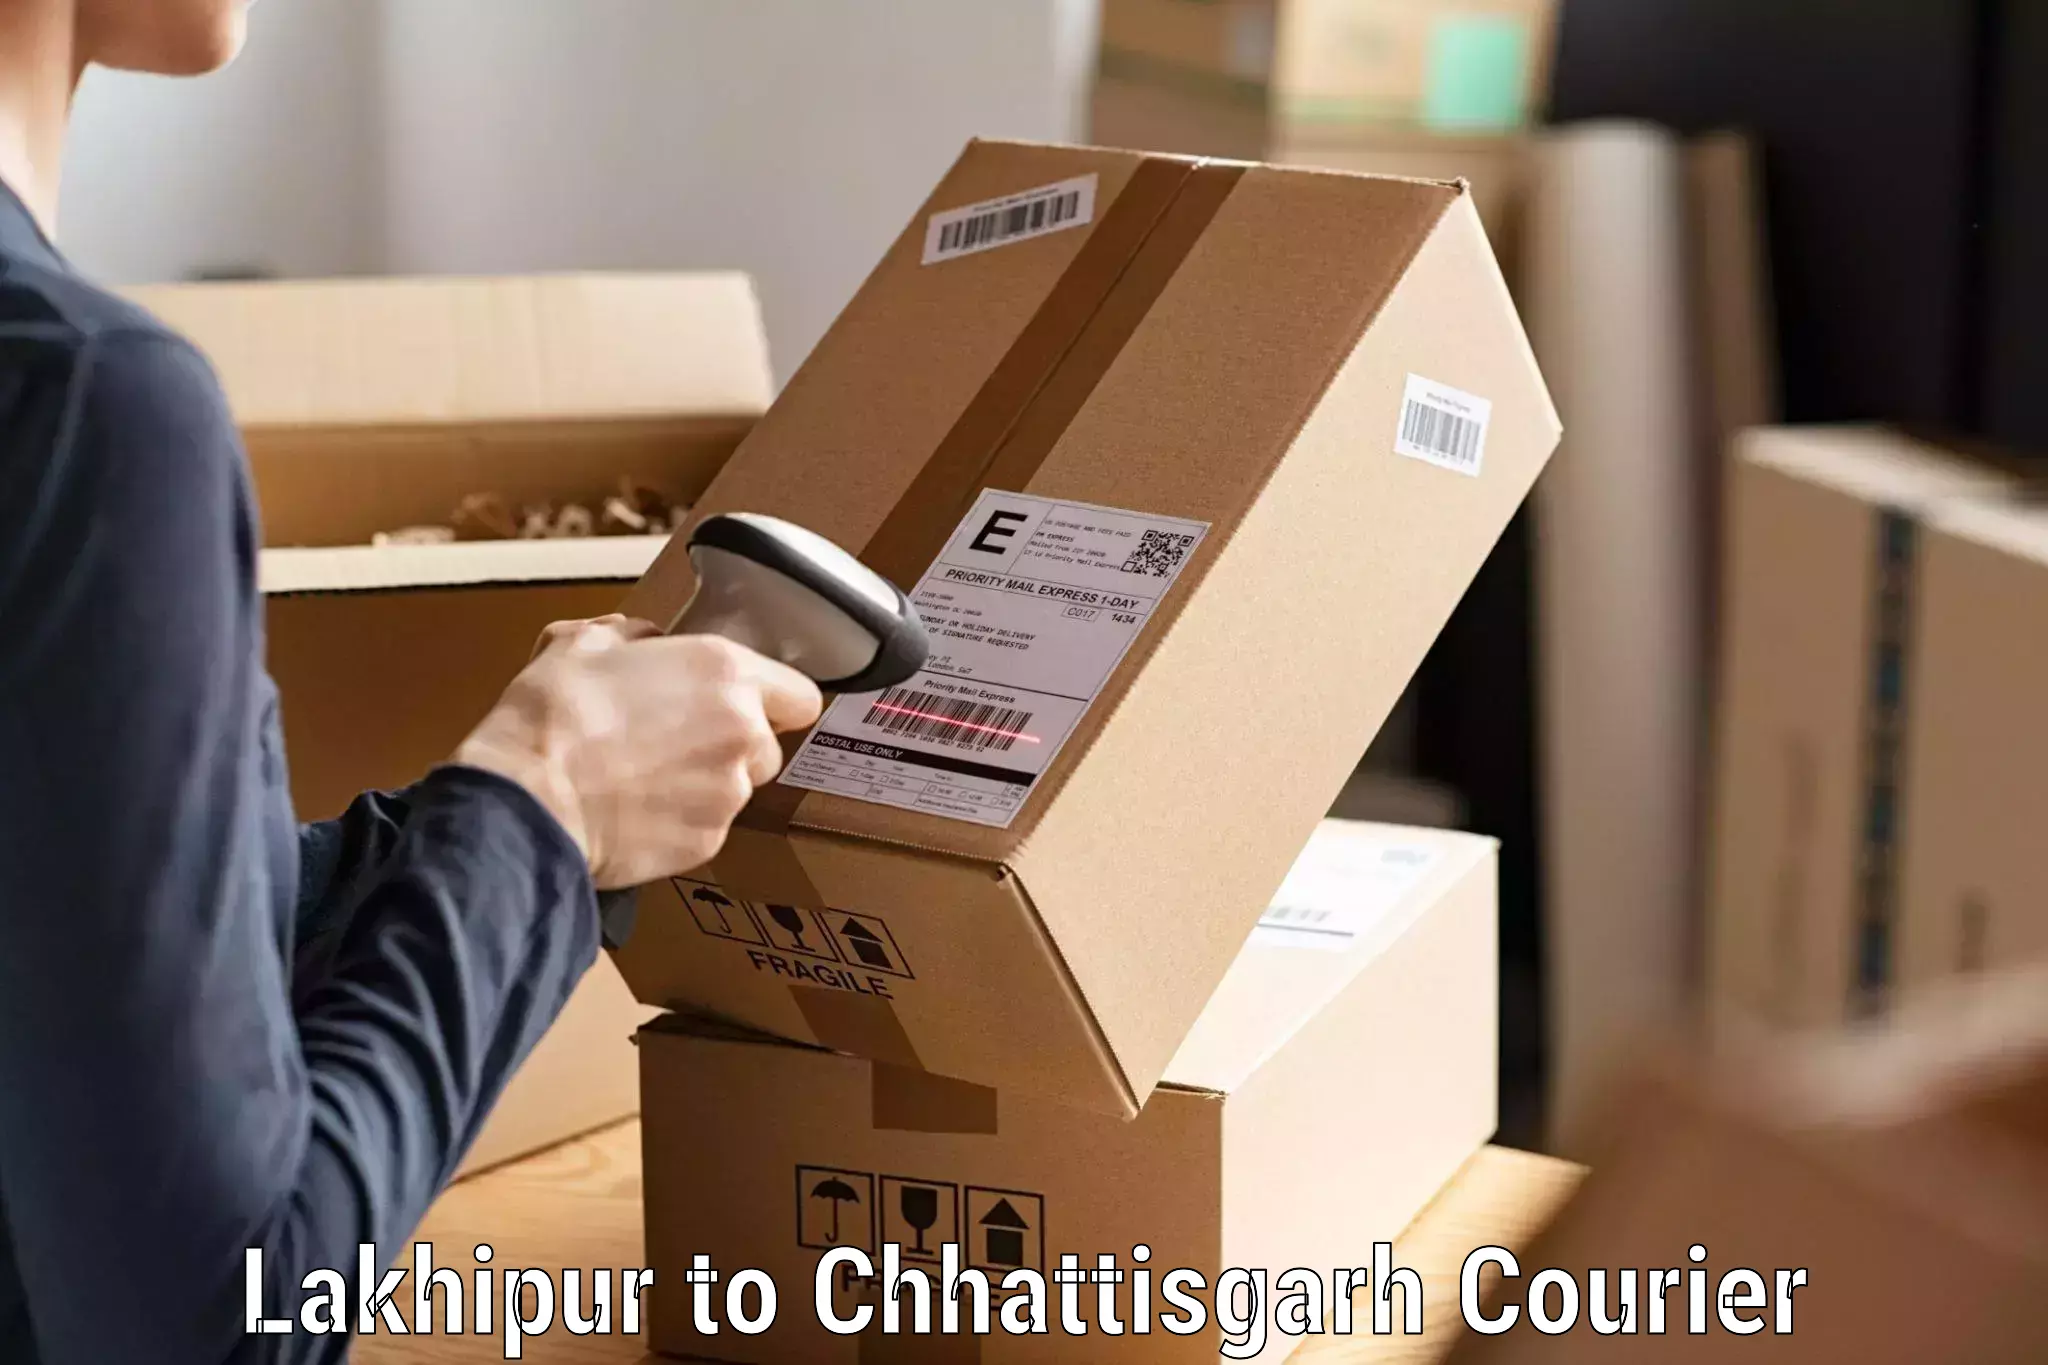 High-priority parcel service Lakhipur to Bhilai